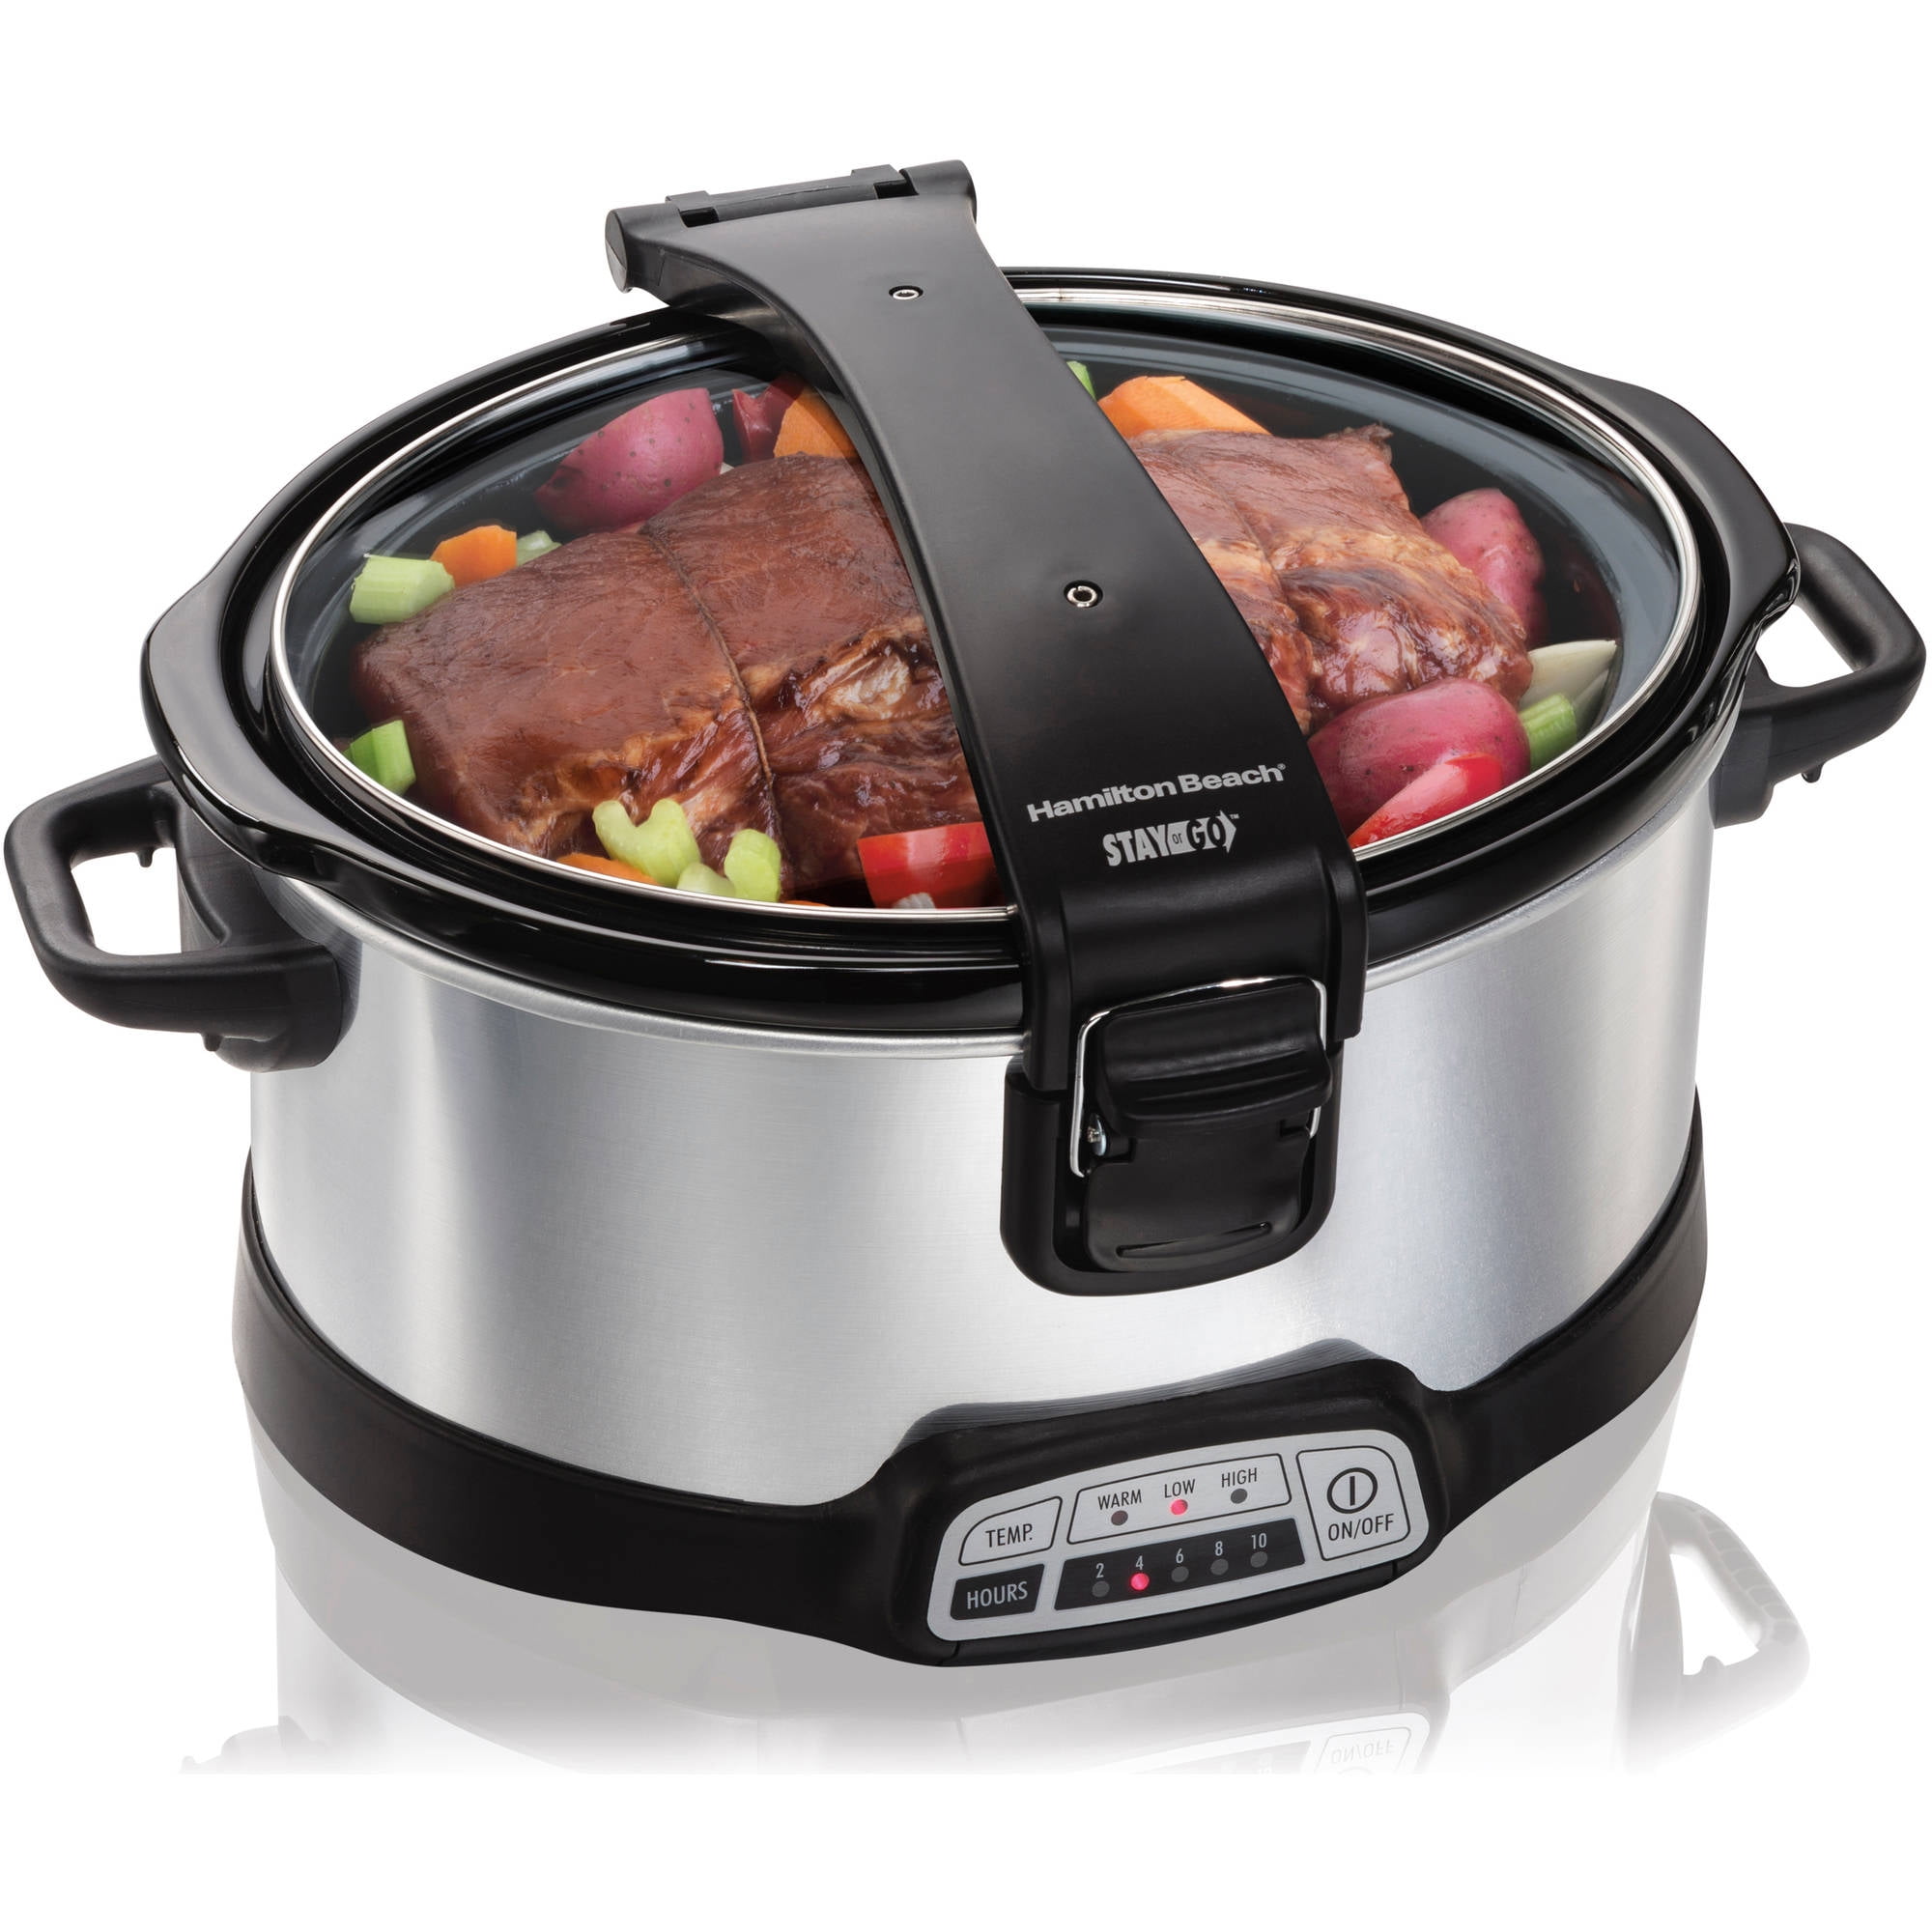 Hamilton Beach Stay or Go Portable 6-Quart Programmable Slow Cooker Review  